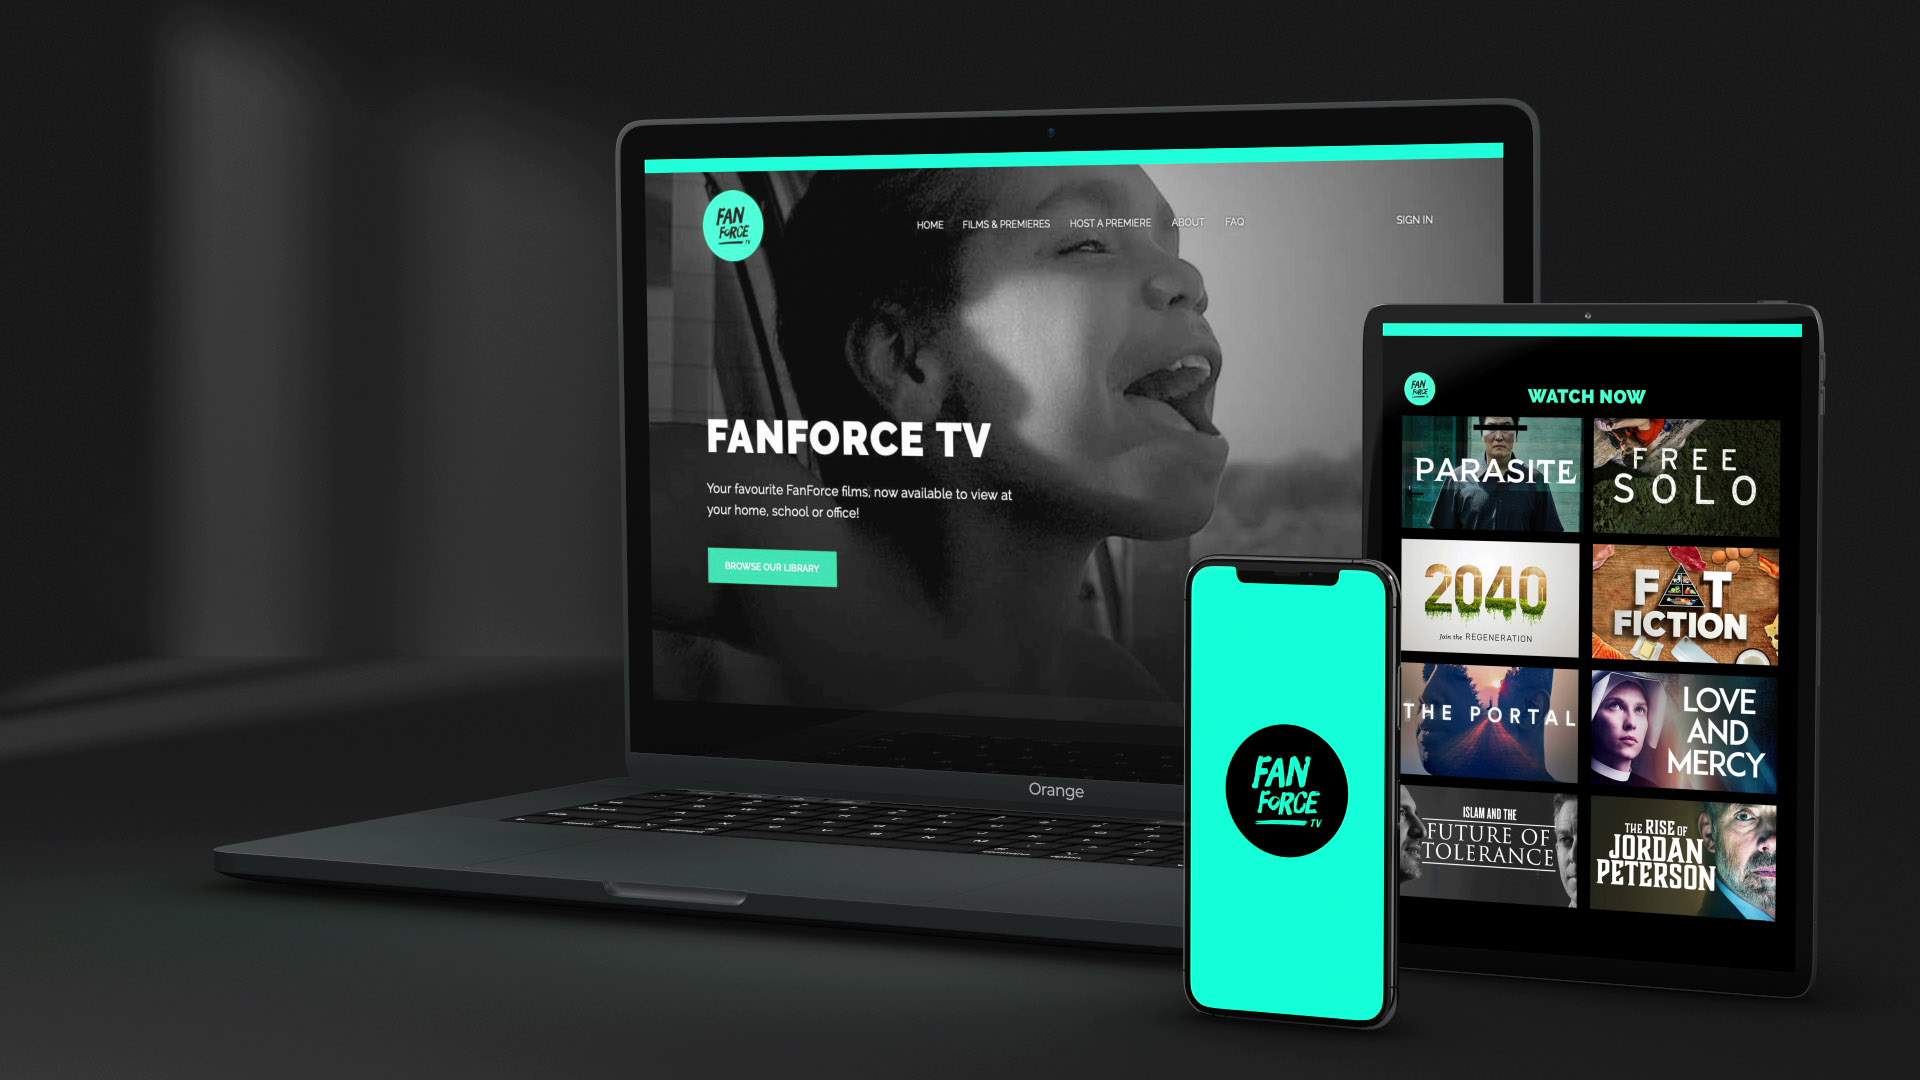 FanForce TV Is the New Streaming Platform Bringing Premieres and Q&As to Your Living Room